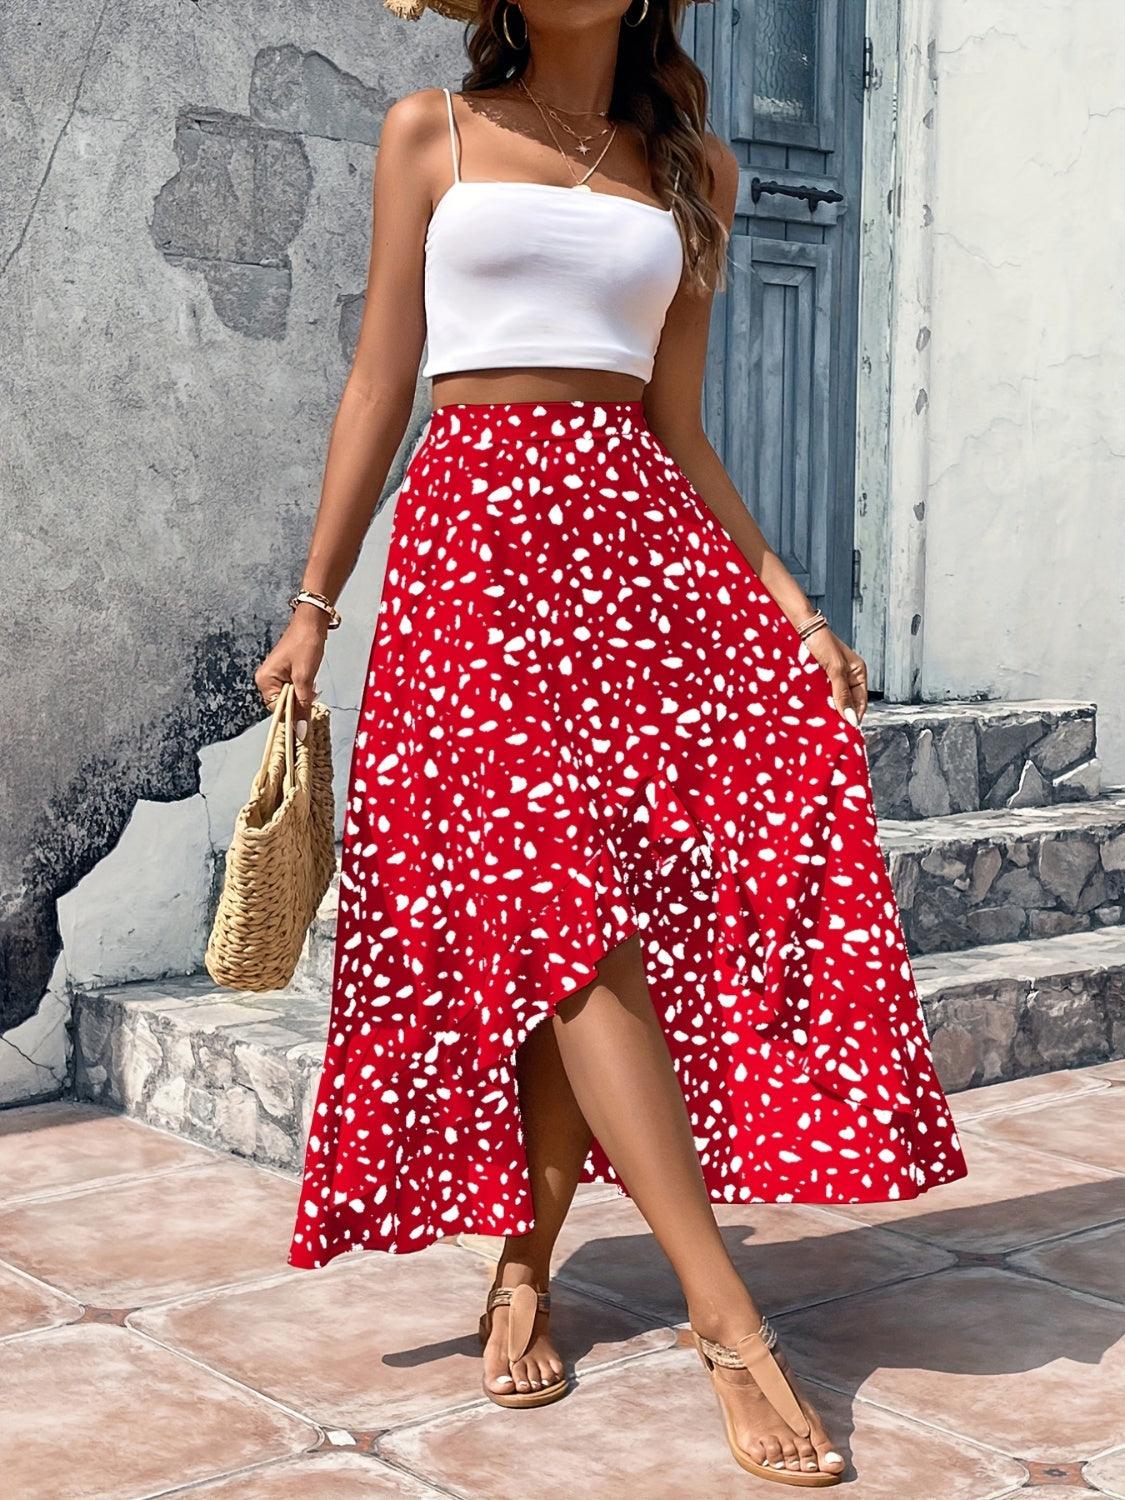 Get the High-Low Printed Skirt Look: A Fashion Must-Have